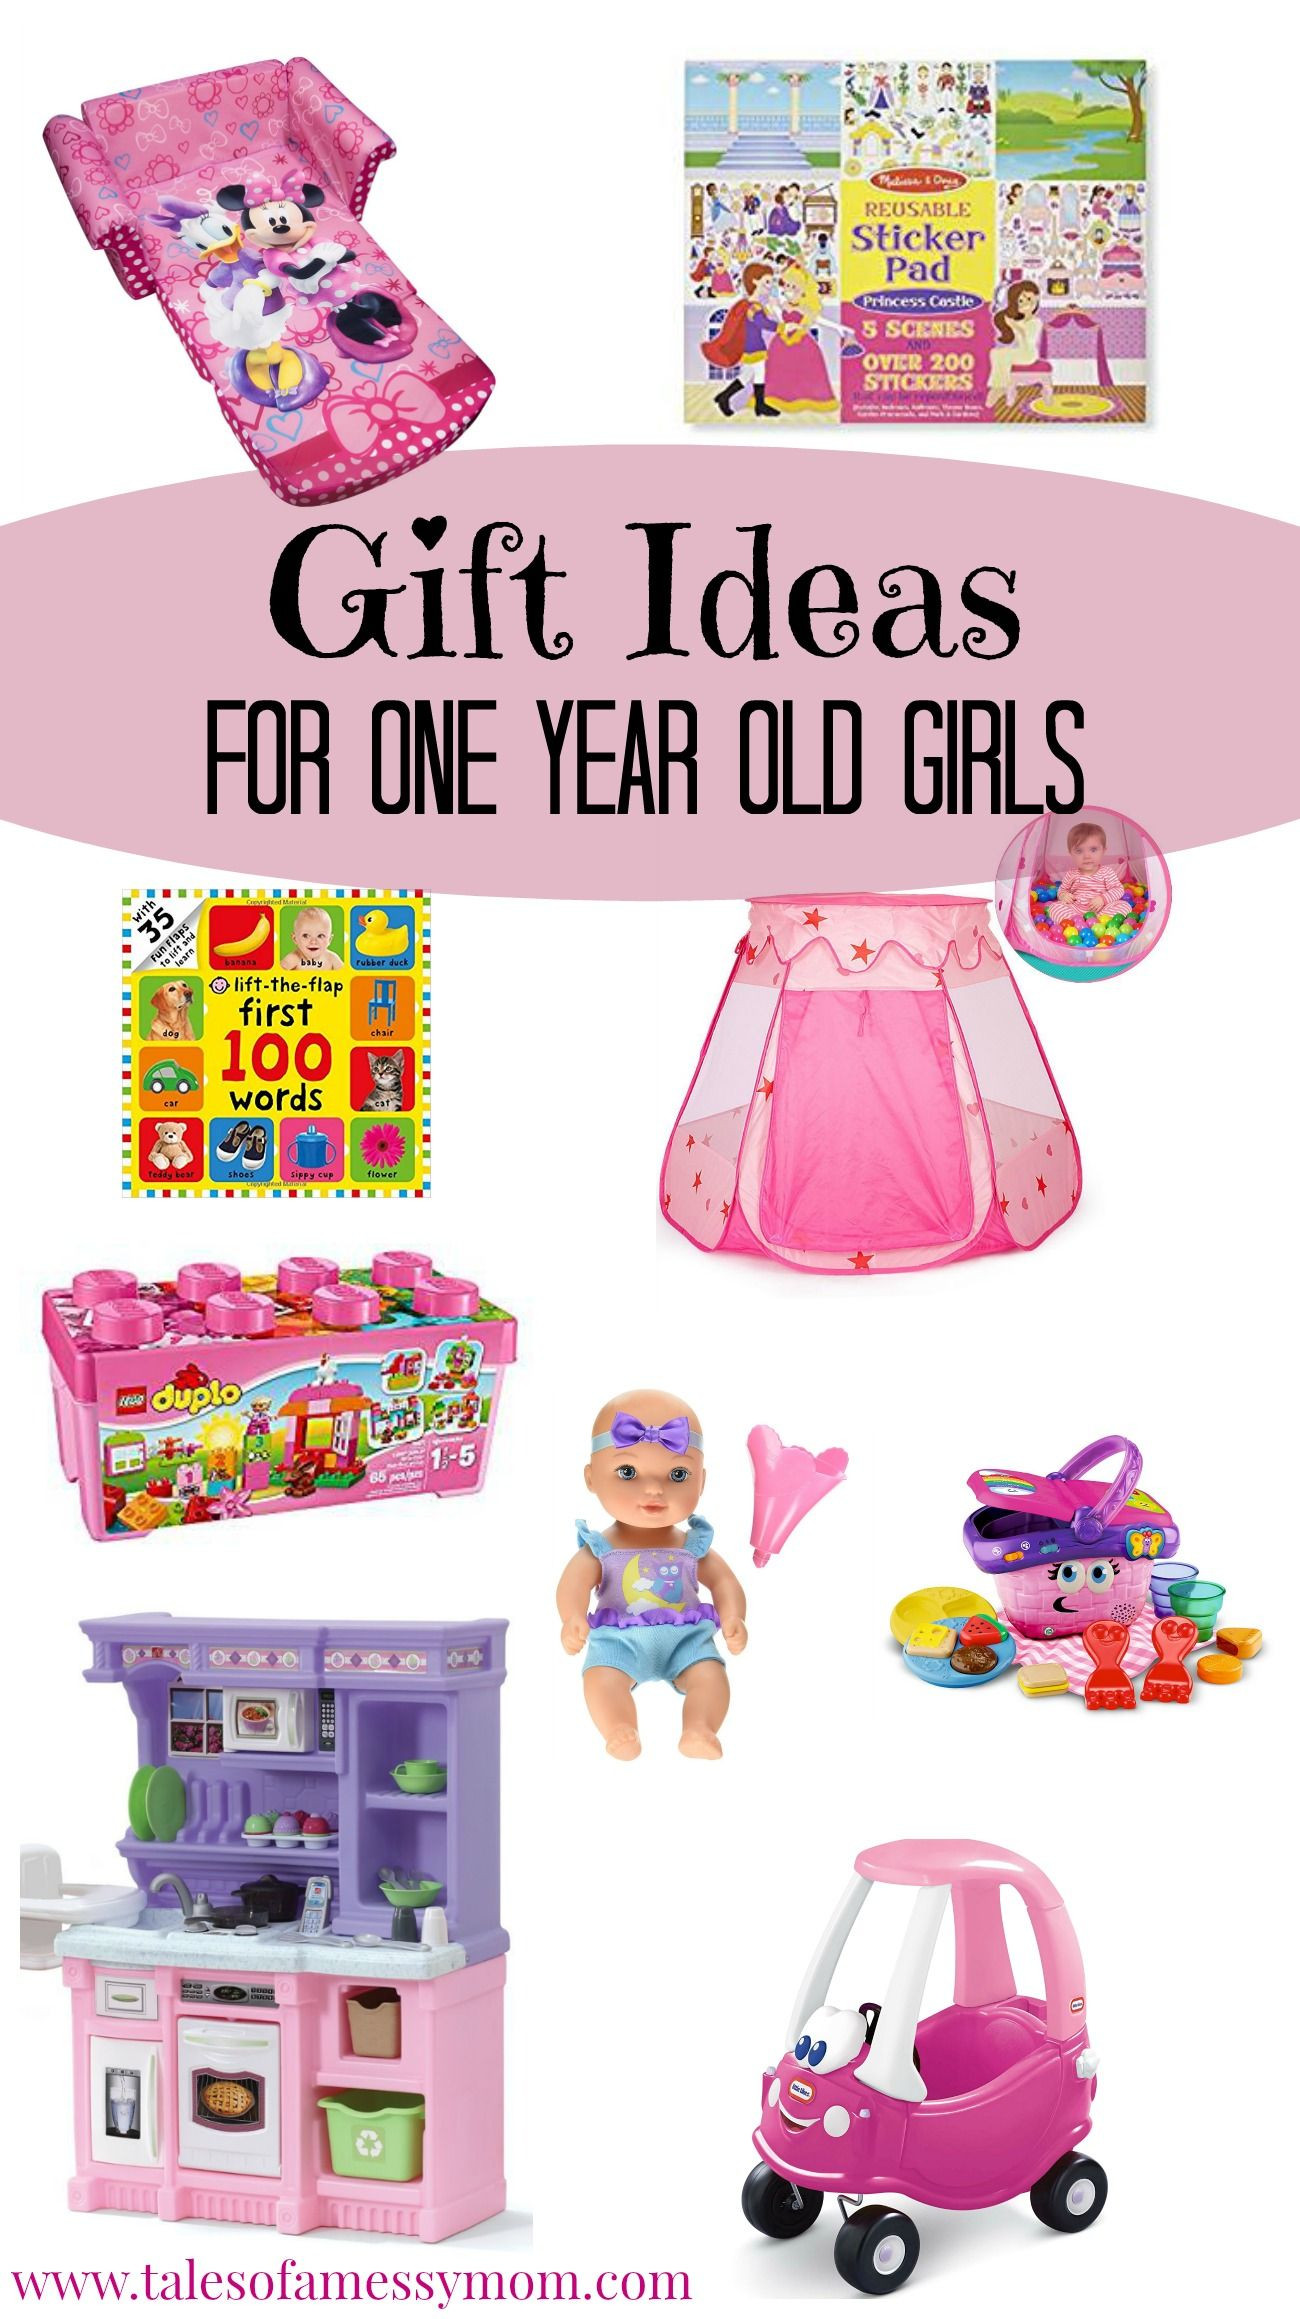 Best Gift Ideas For 1 Year Old Baby Girl
 Gift Ideas for e Year Old Girls